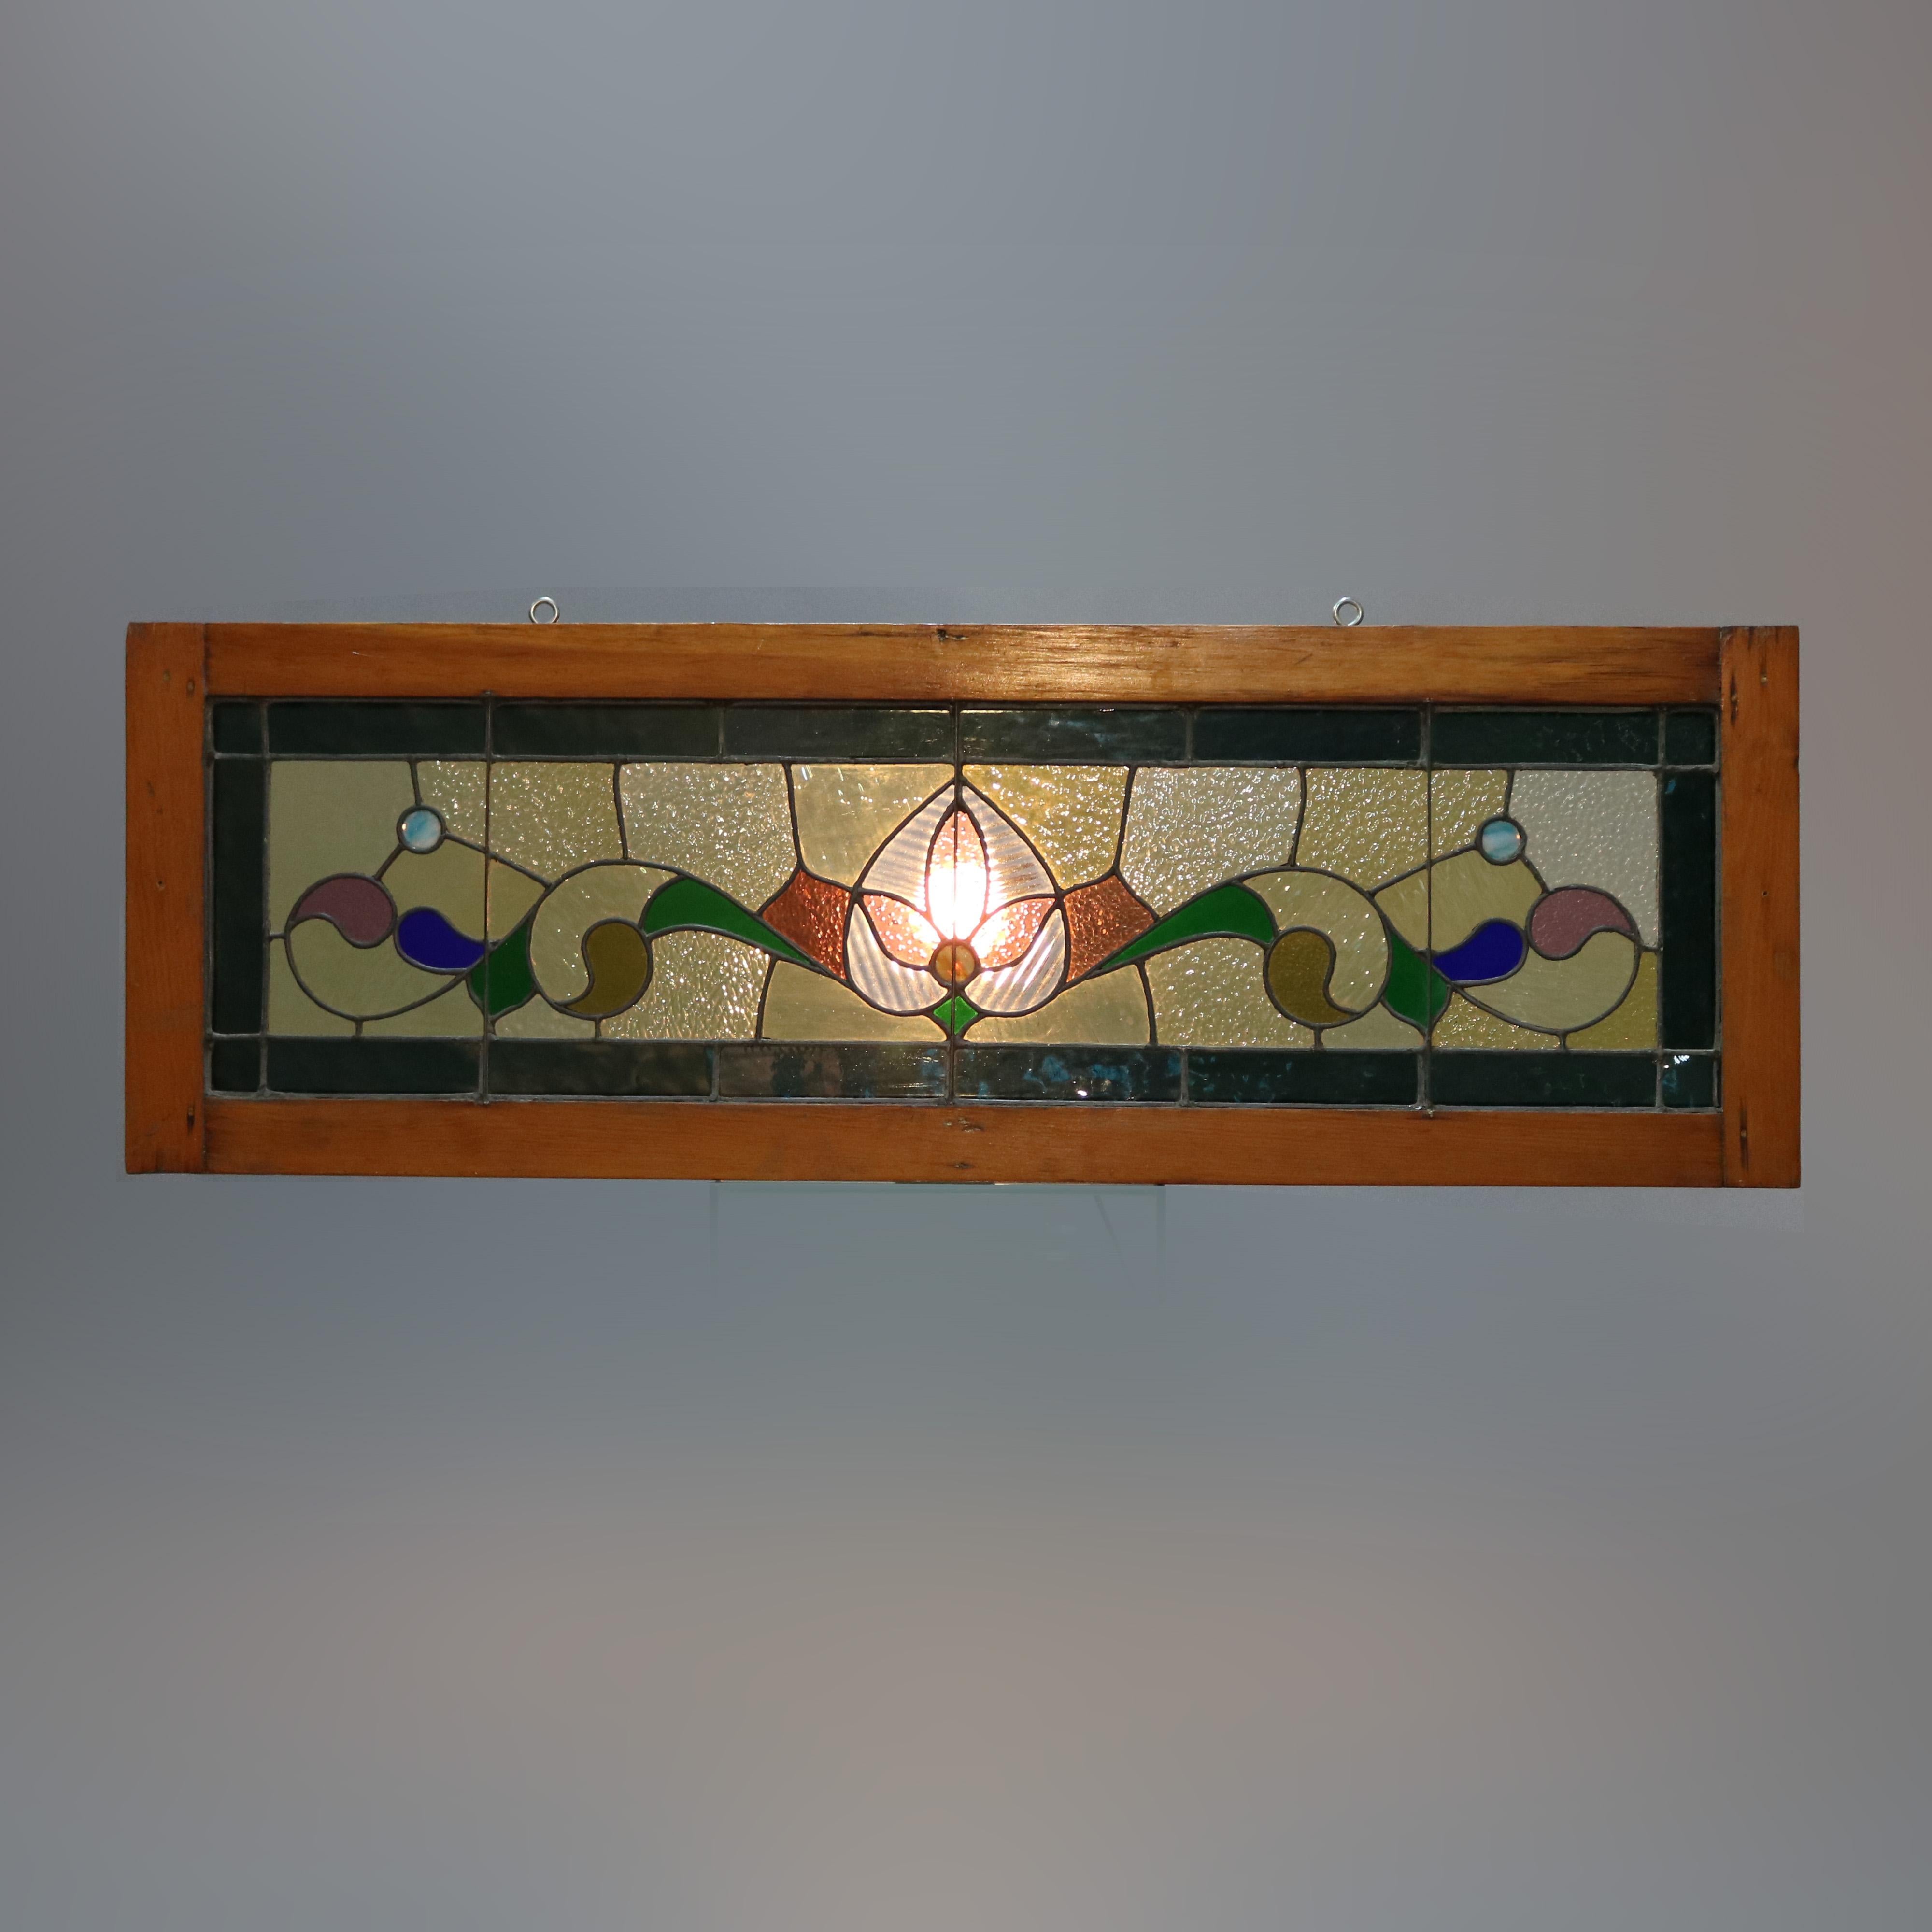 An antique Arts & Crafts long window offers leaded jeweled and stained glass with central foliate element with flanking scroll work, seated in wood sash, c1910

Measures: 17